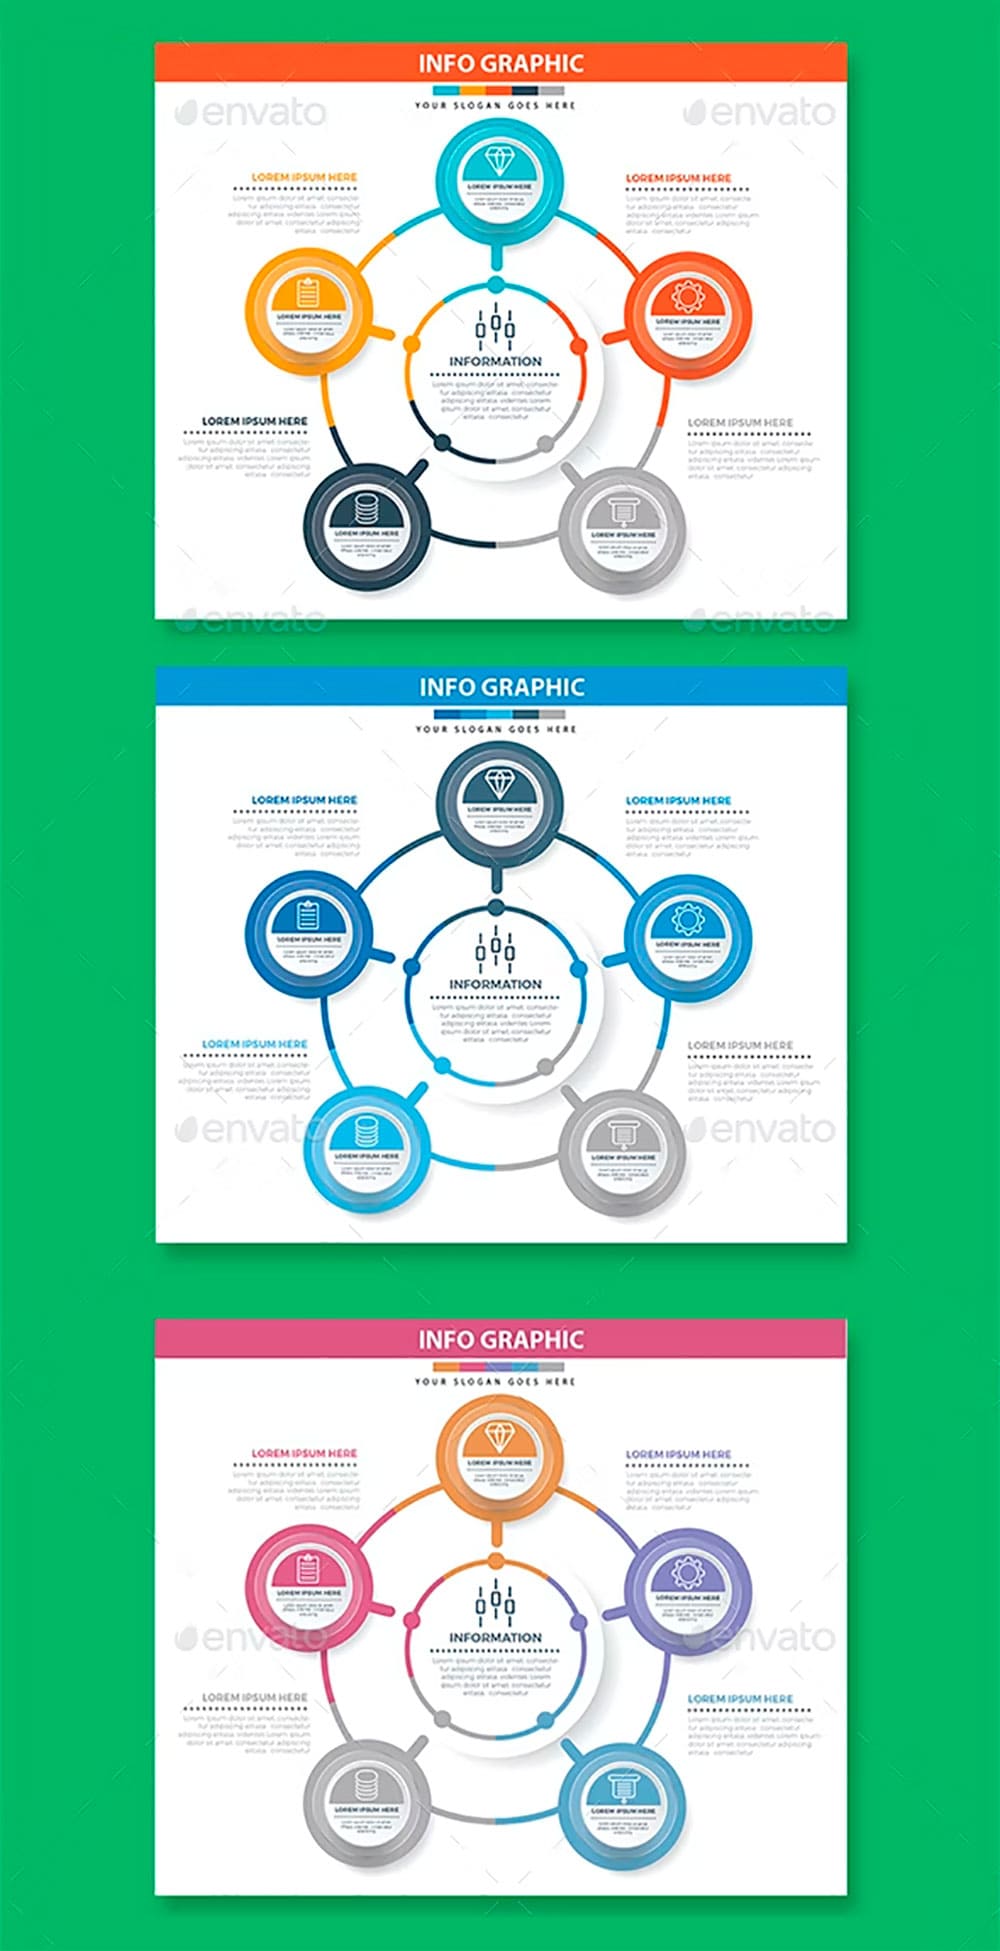 Infographics on green design, picture for pinterest.